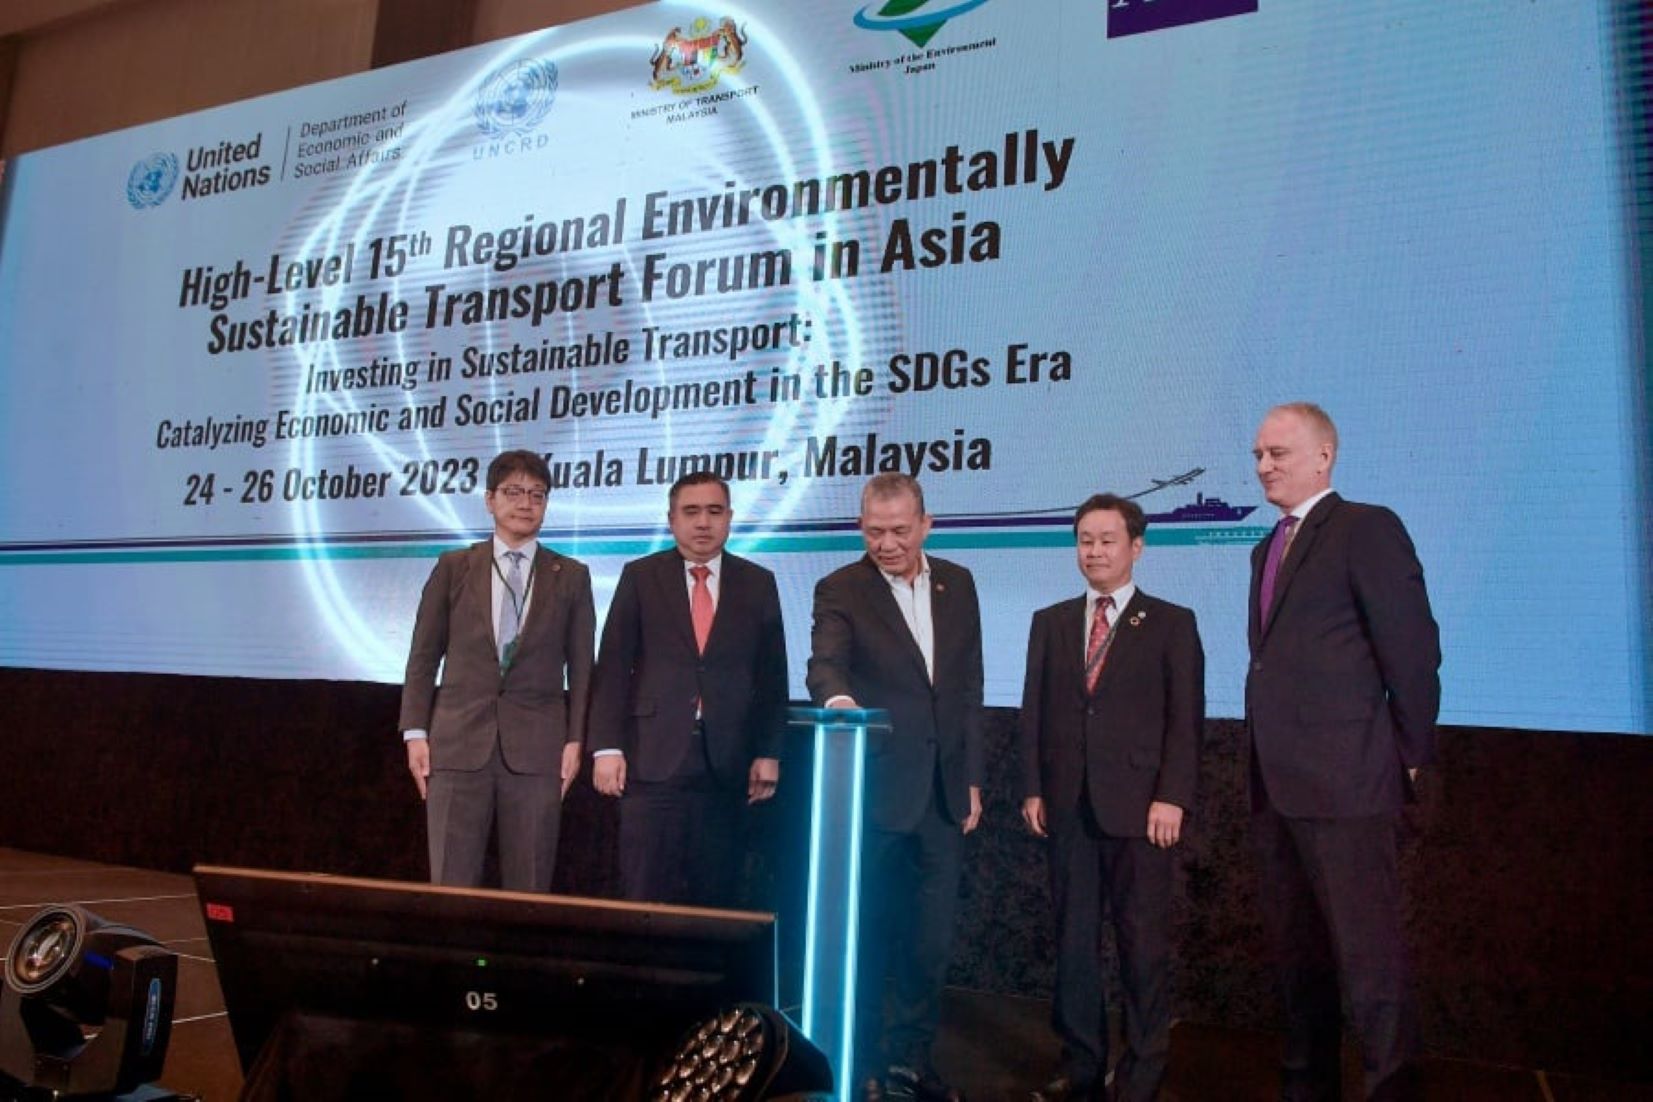 Greater Integration Key To Boosting Asia’s Green Economy: Malaysian Minister